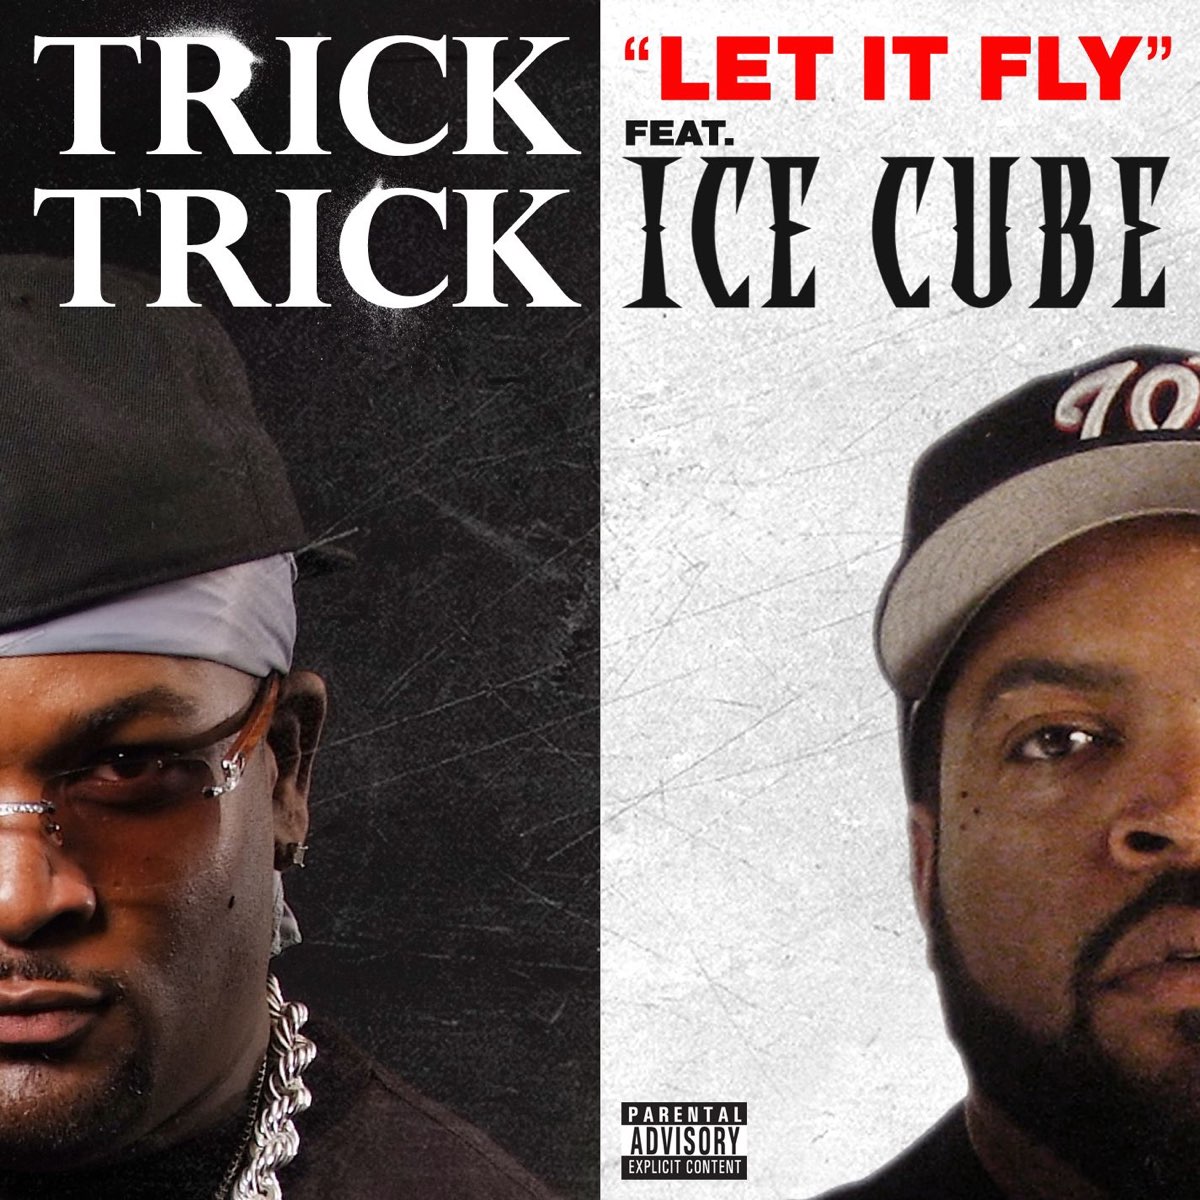 Let it fly. Ice Cube альбомы. Ice Cube feat. Trick Trick. Ice Cube Lil Jon.